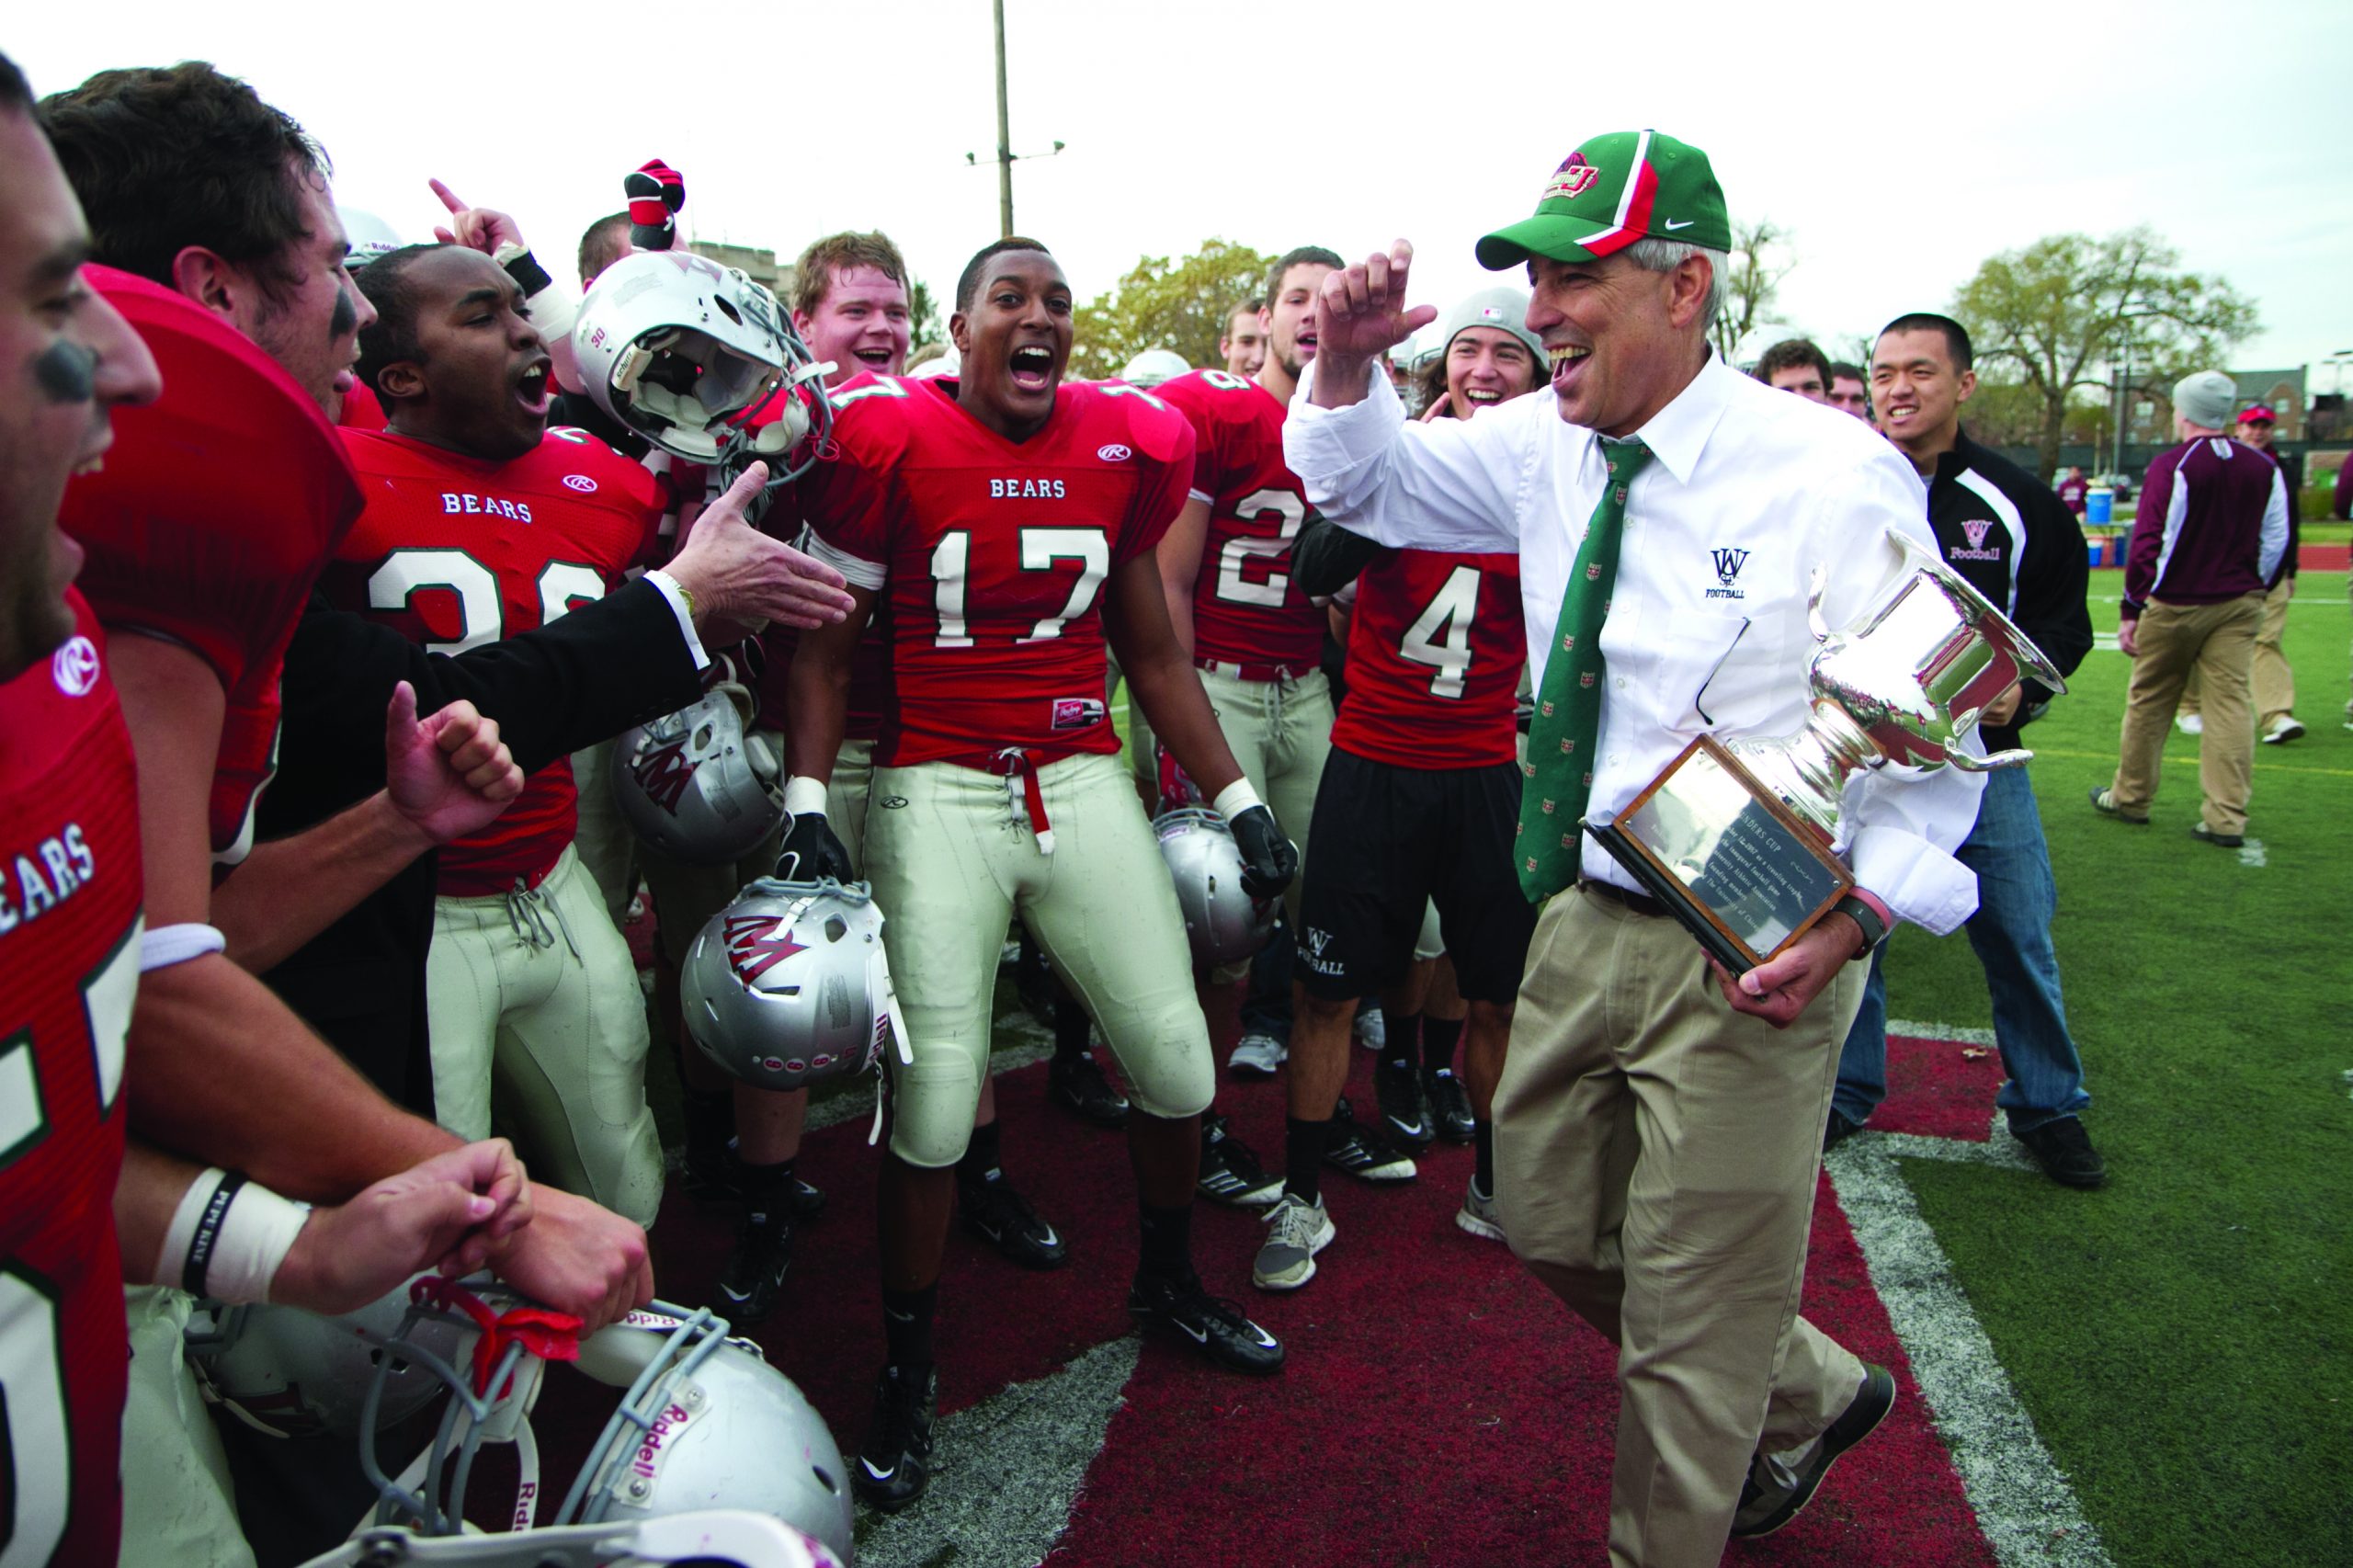 A man in a white button down shirt and green tie holds a trophy in his left hand and raises his right arm toward a green and red cap. He wears beige khakis. To his right are football players in red uniforms and white pants. They are shouting, many with their helmets off.